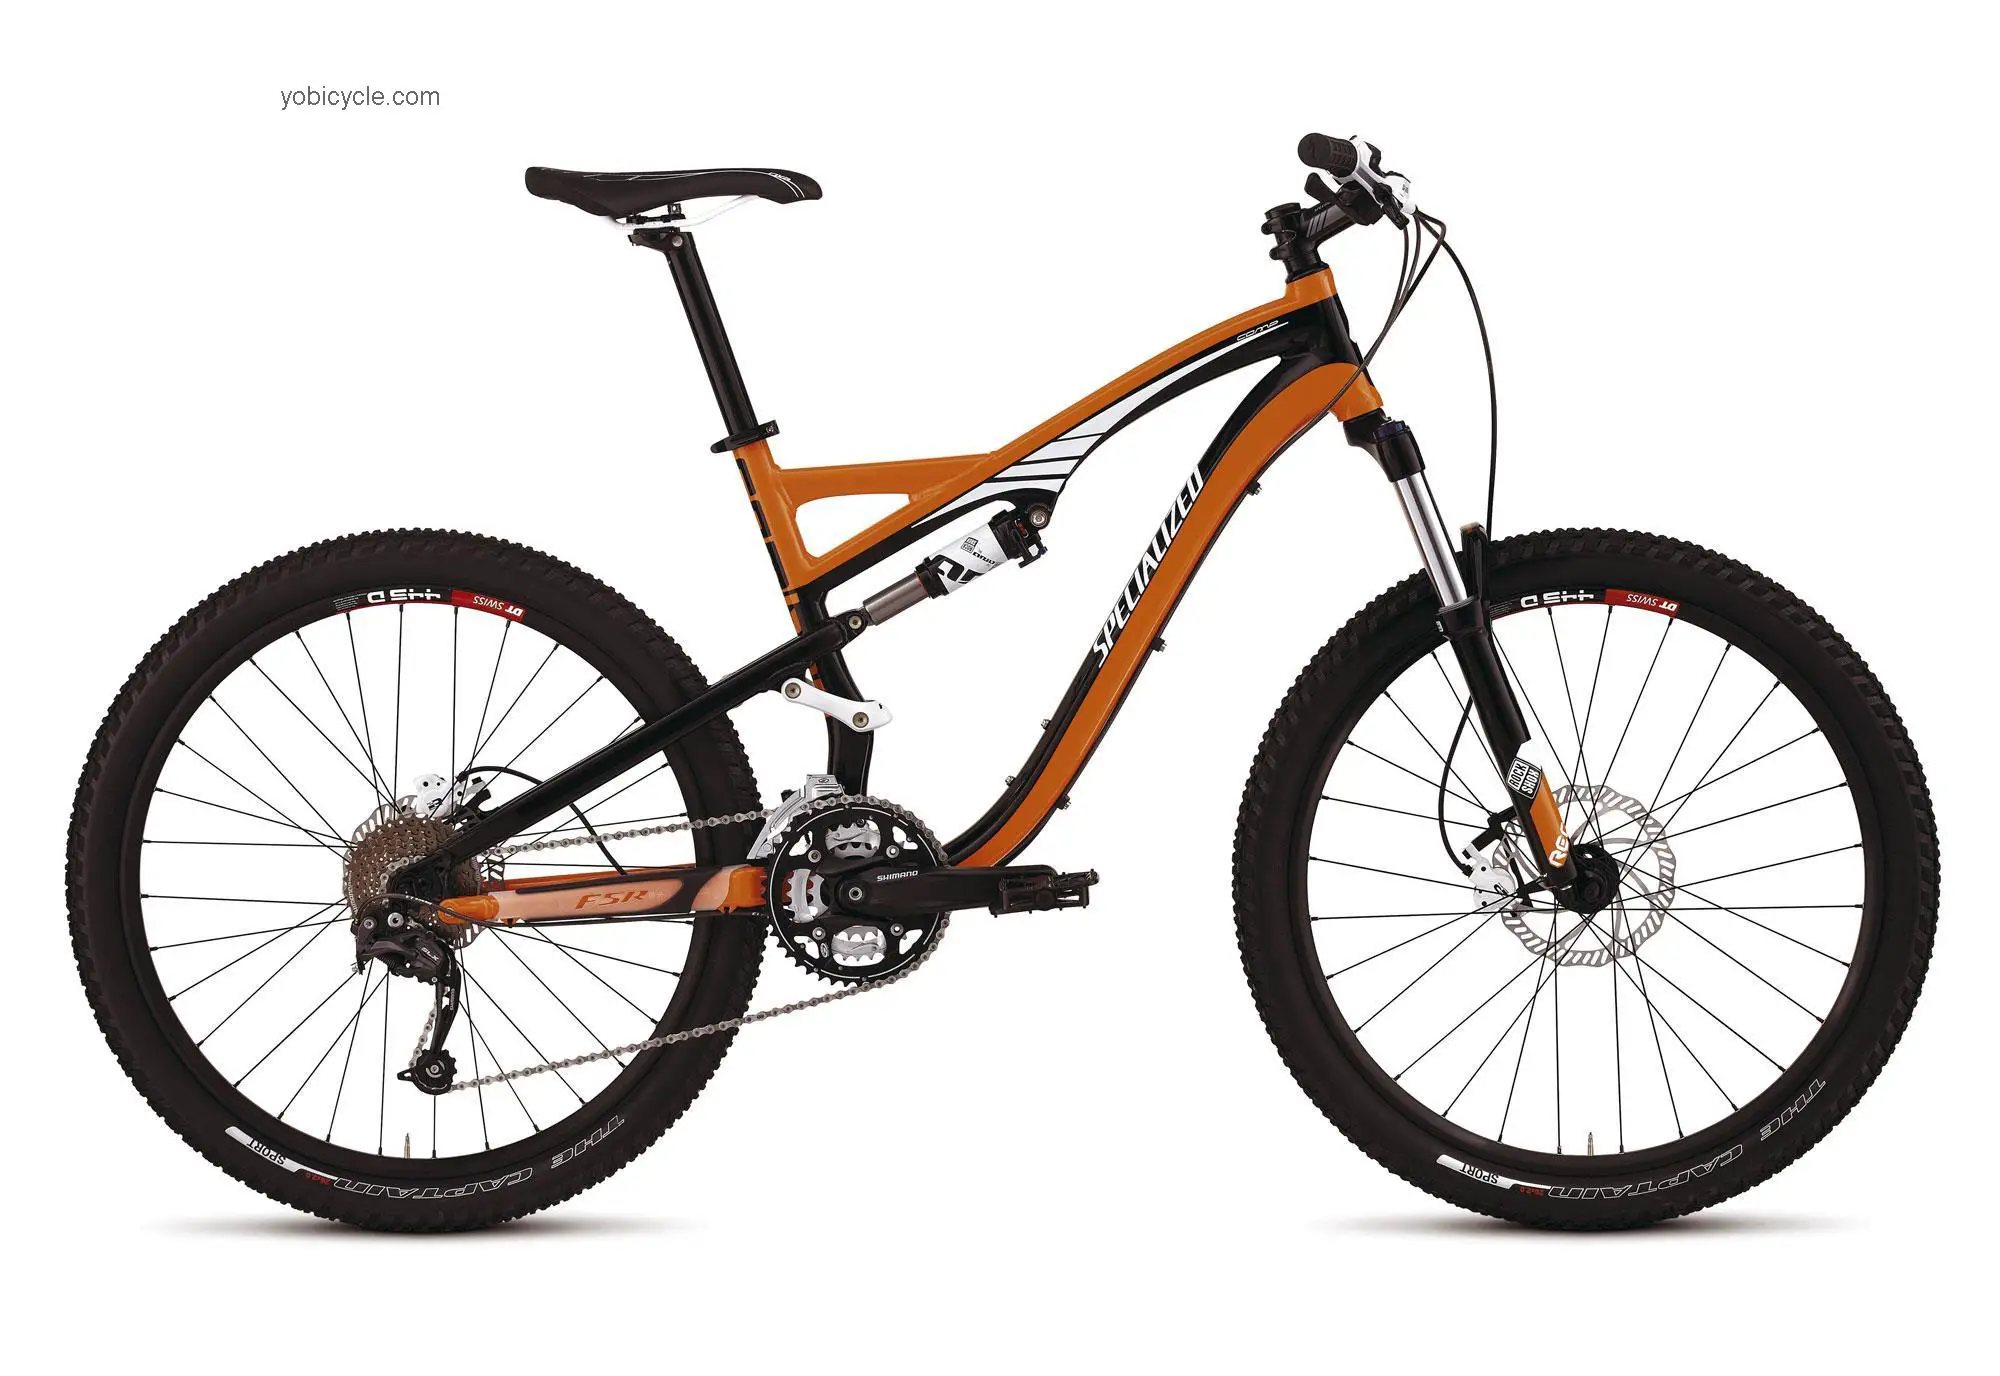 Specialized Camber FSR Comp 2012 comparison online with competitors